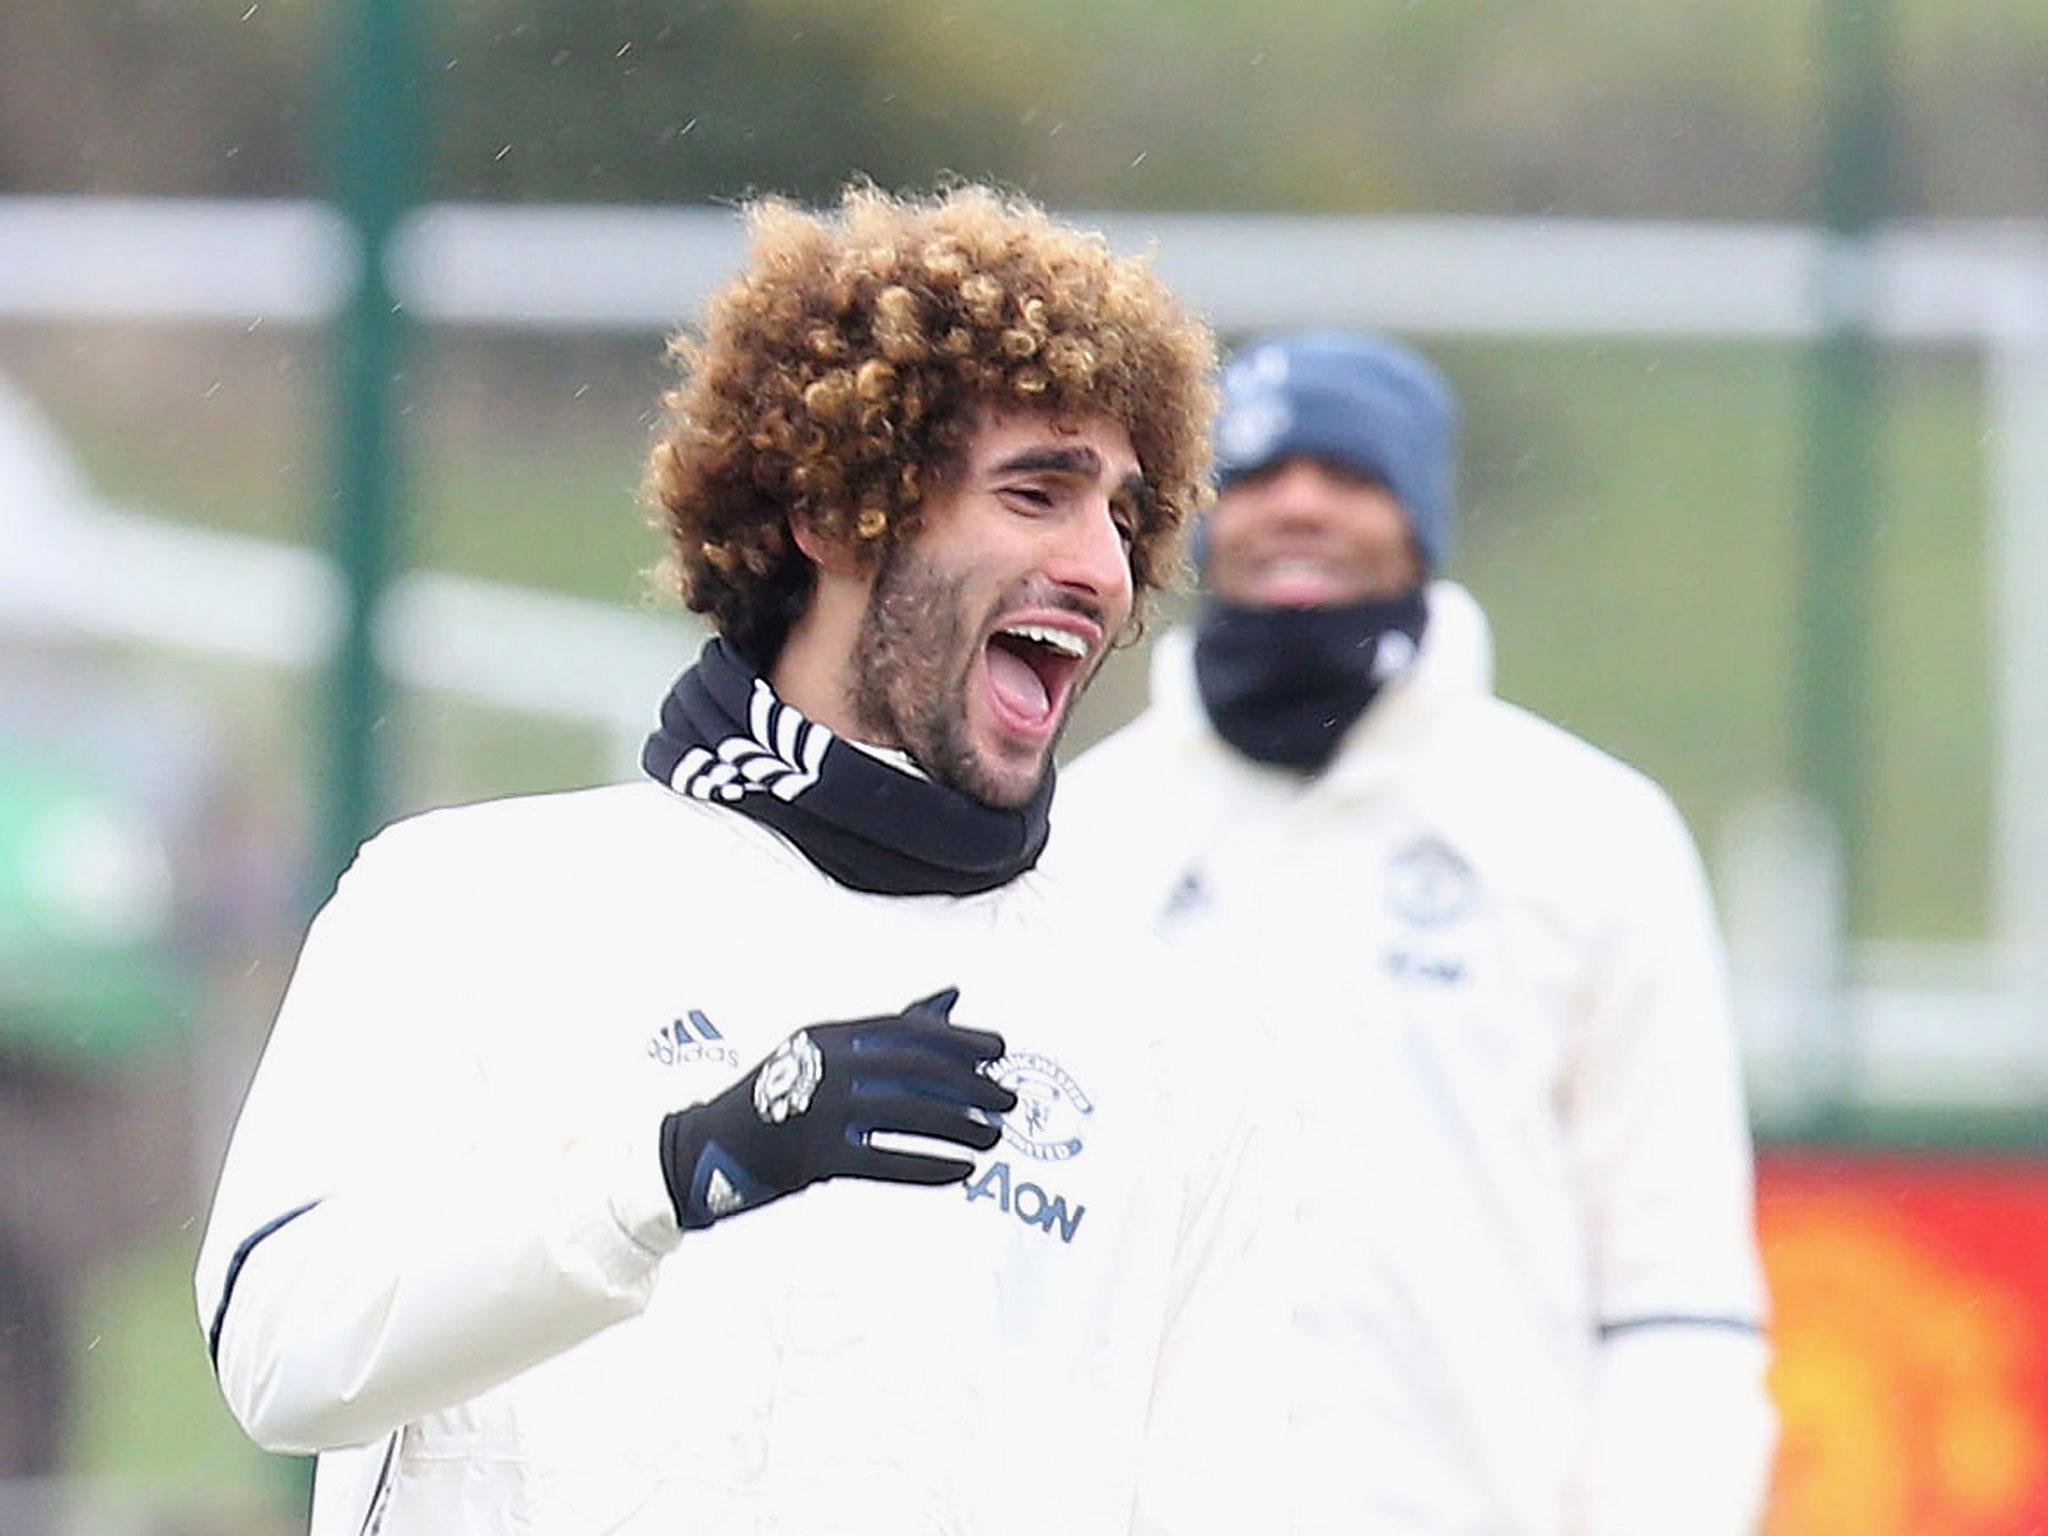 Jose Mourinho could turn to Marouane Fellaini up front against Chelsea